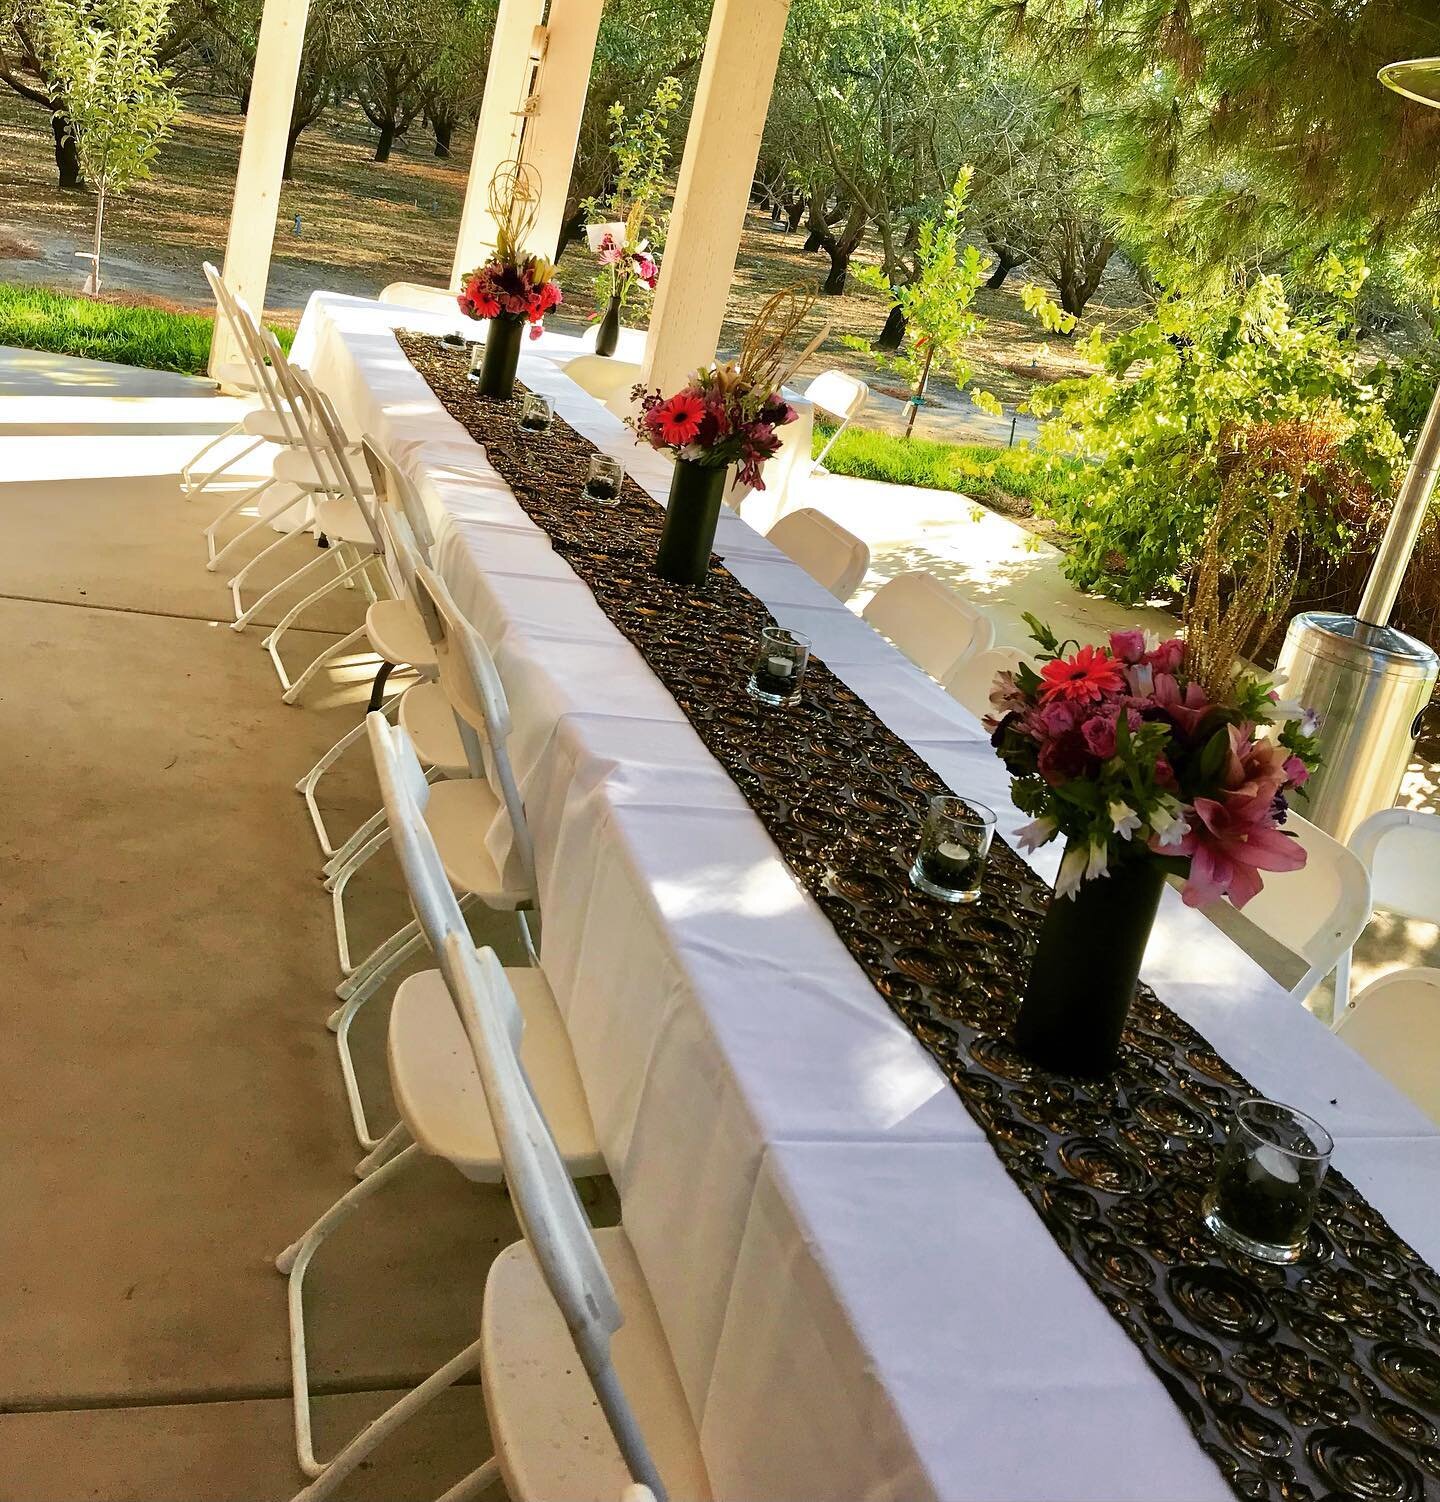 Family Reunion&rsquo;s, Get-Together&rsquo;s?? We Have Your Covered. Providing Rectangular Tables, Chairs, And Table Linen&rsquo;s. Book Now.